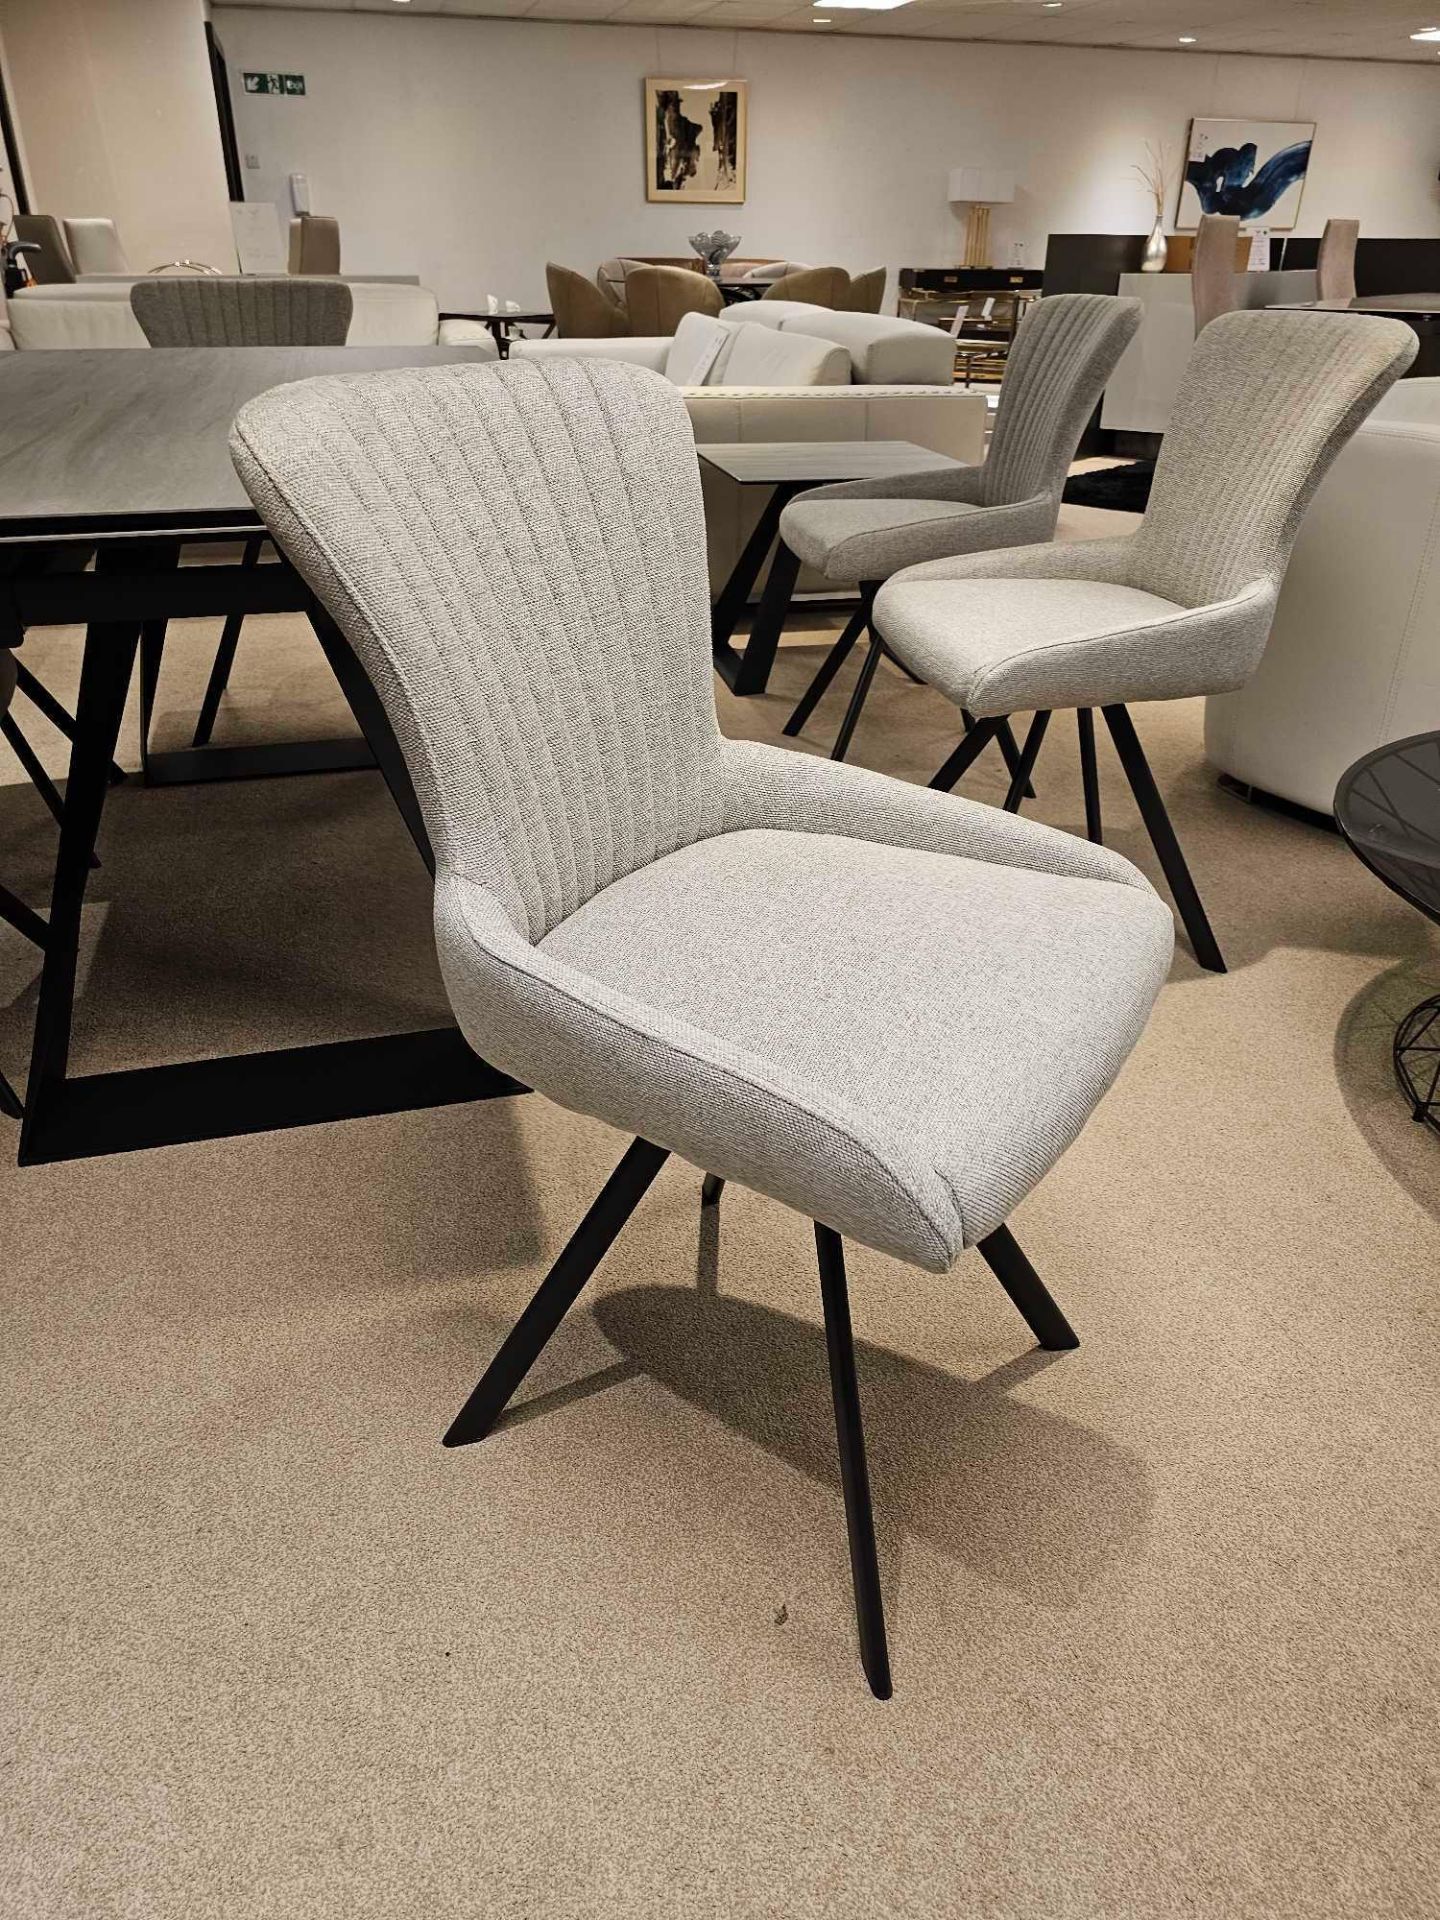 A Set of 6 x Maria Chairs by Kesterport Maria has the same self-return mechanism as many of the - Image 2 of 9